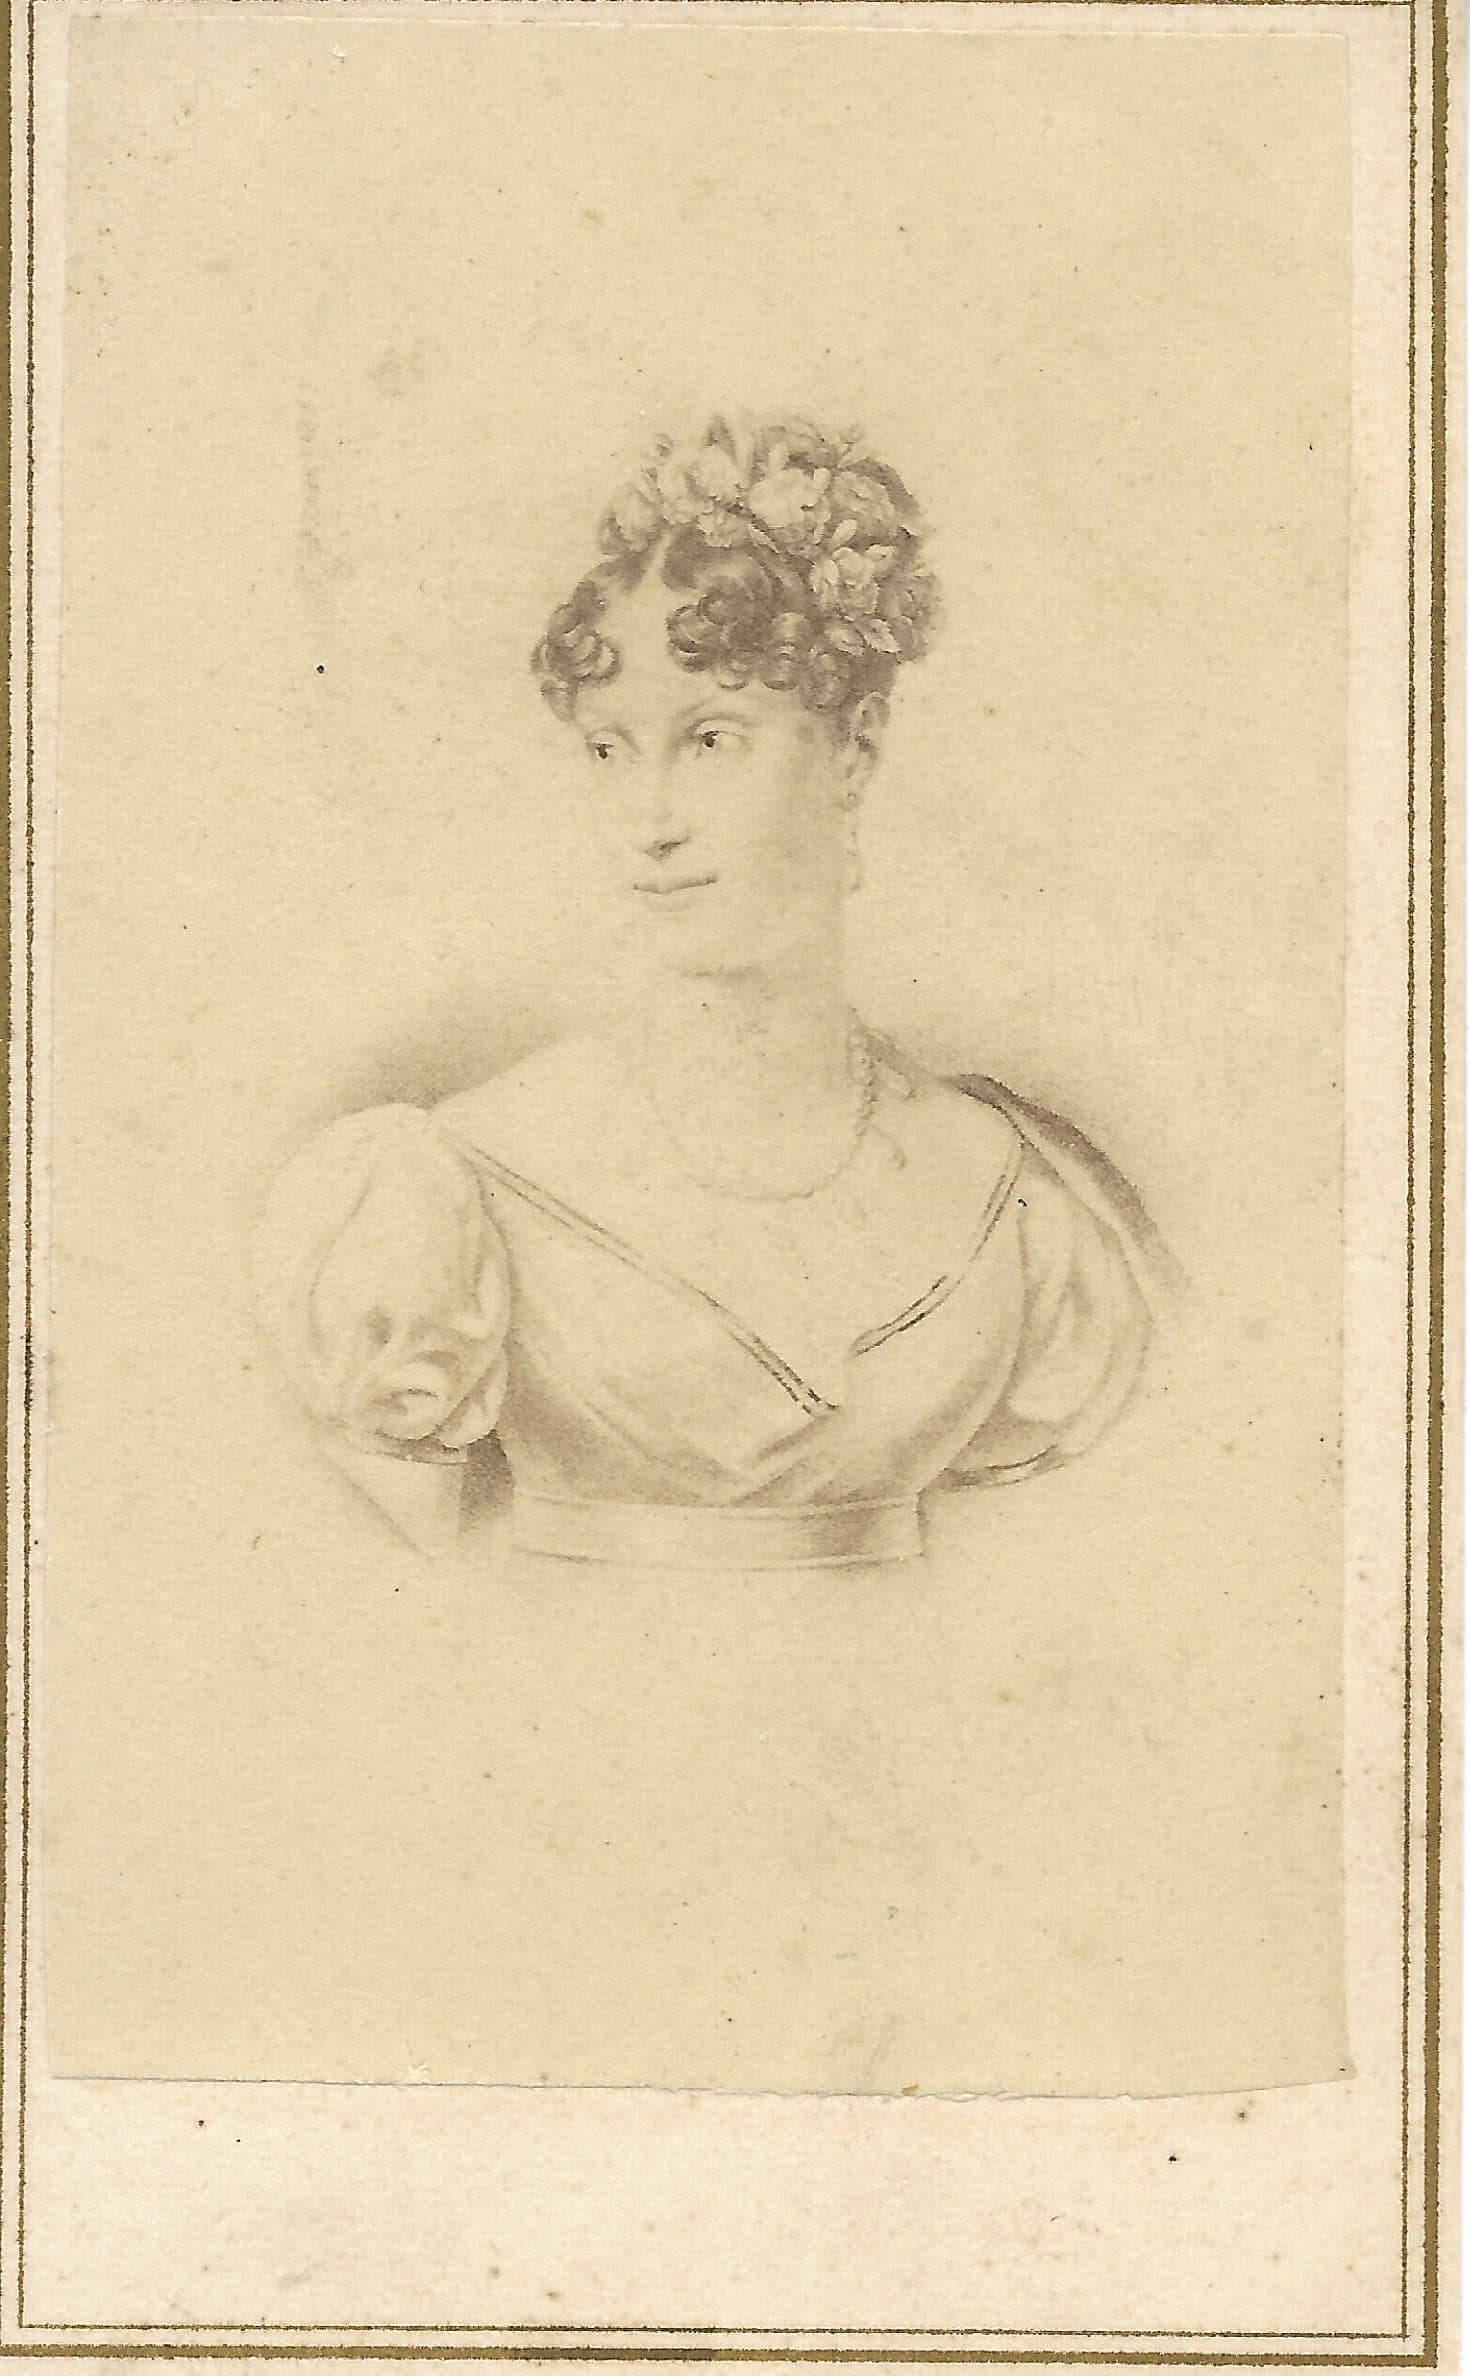 Marie Louise - second wife of Napoleon